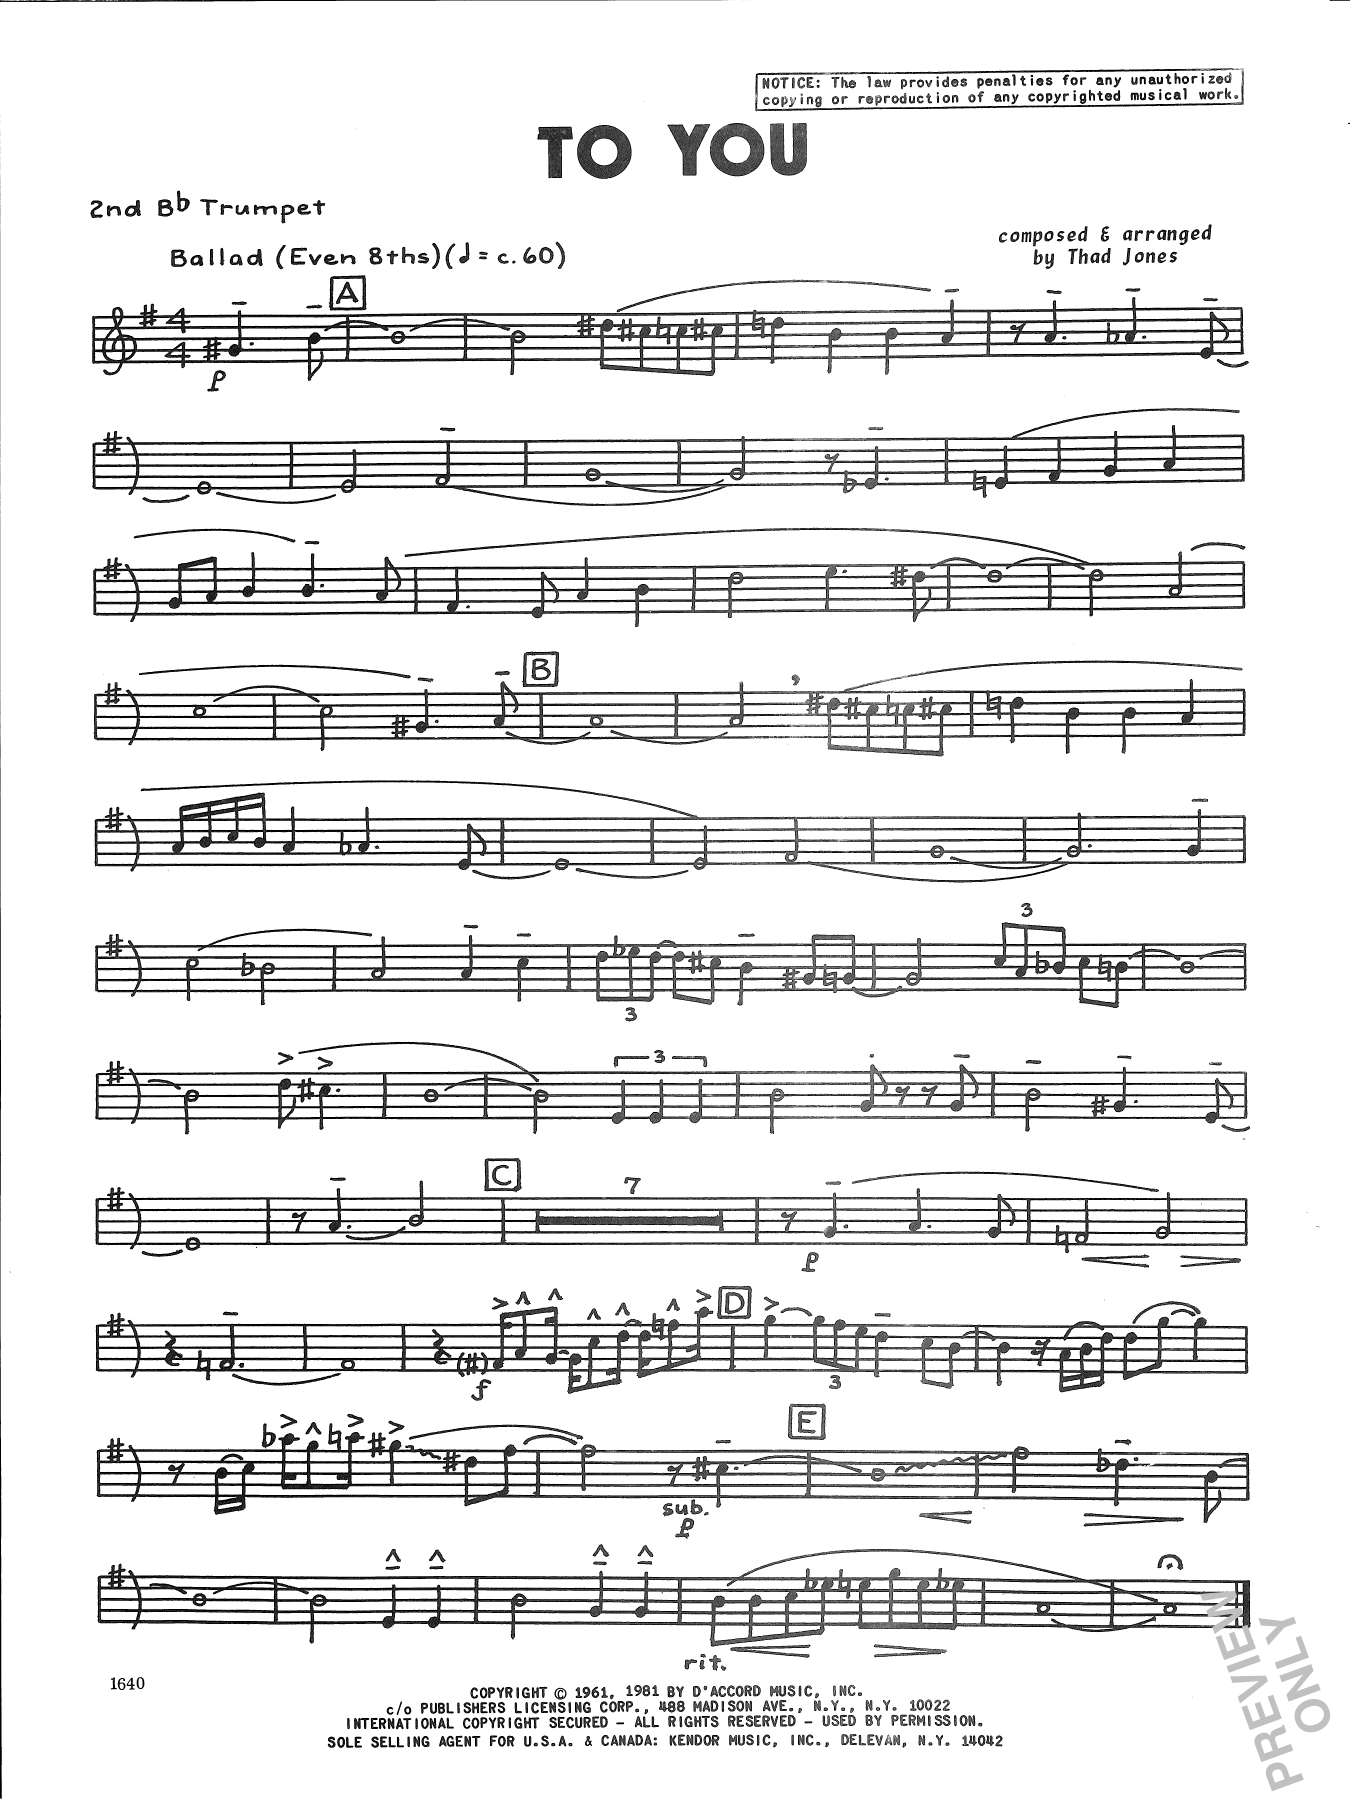 Download Thad Jones To You - 2nd Bb Trumpet Sheet Music